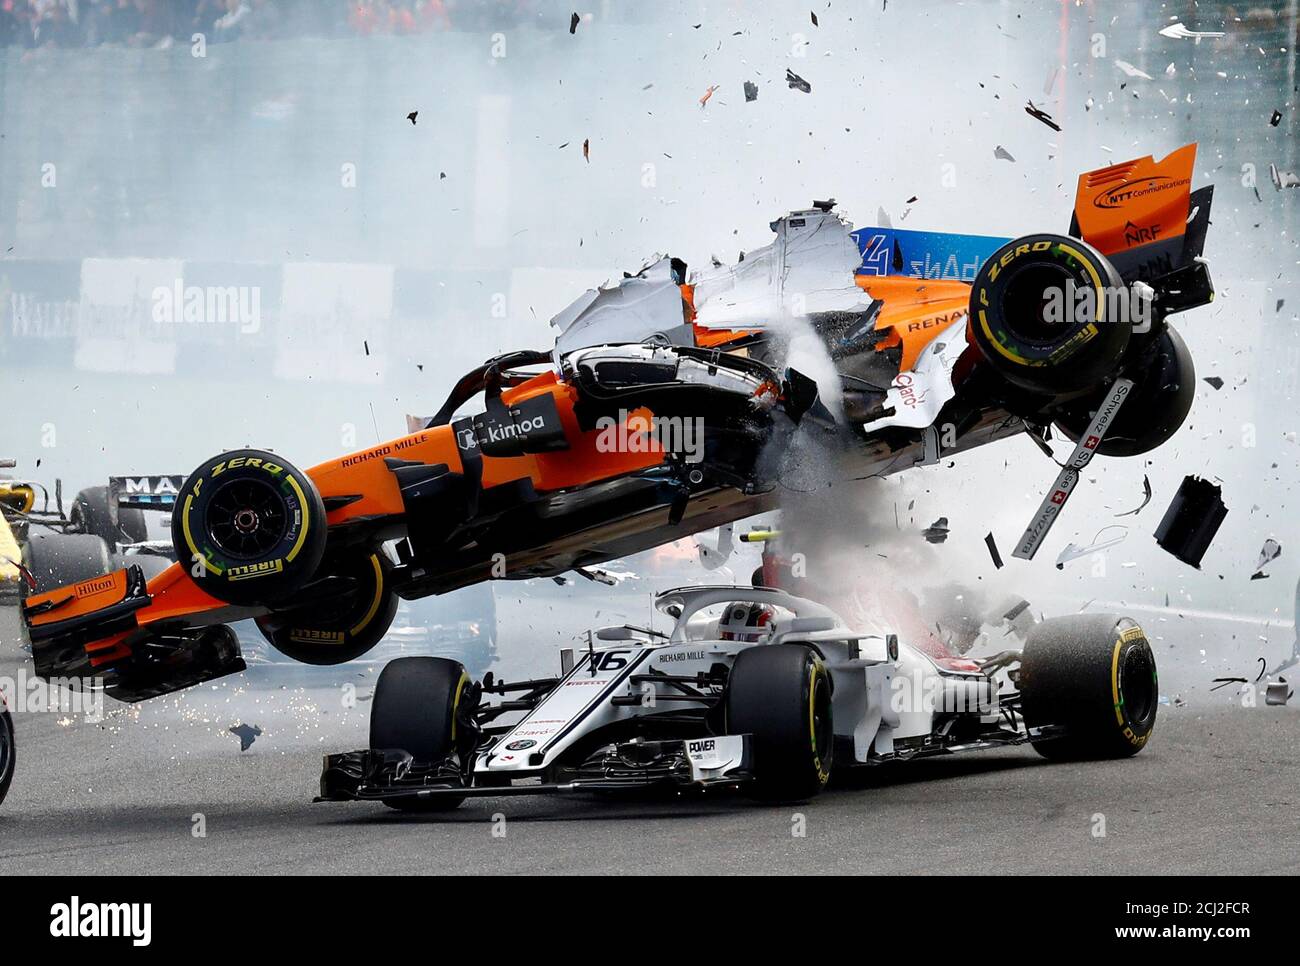 McLaren's Fernando Alonso and Sauber's Charles Leclerc crash at the first  corner during the Belgian Grand Prix, Formula One F1, at Spa-Francorchamps,  Stavelot, Belgium, August 26, 2018. REUTERS/Francois Lenoir SEARCH "POY  SPORTS"